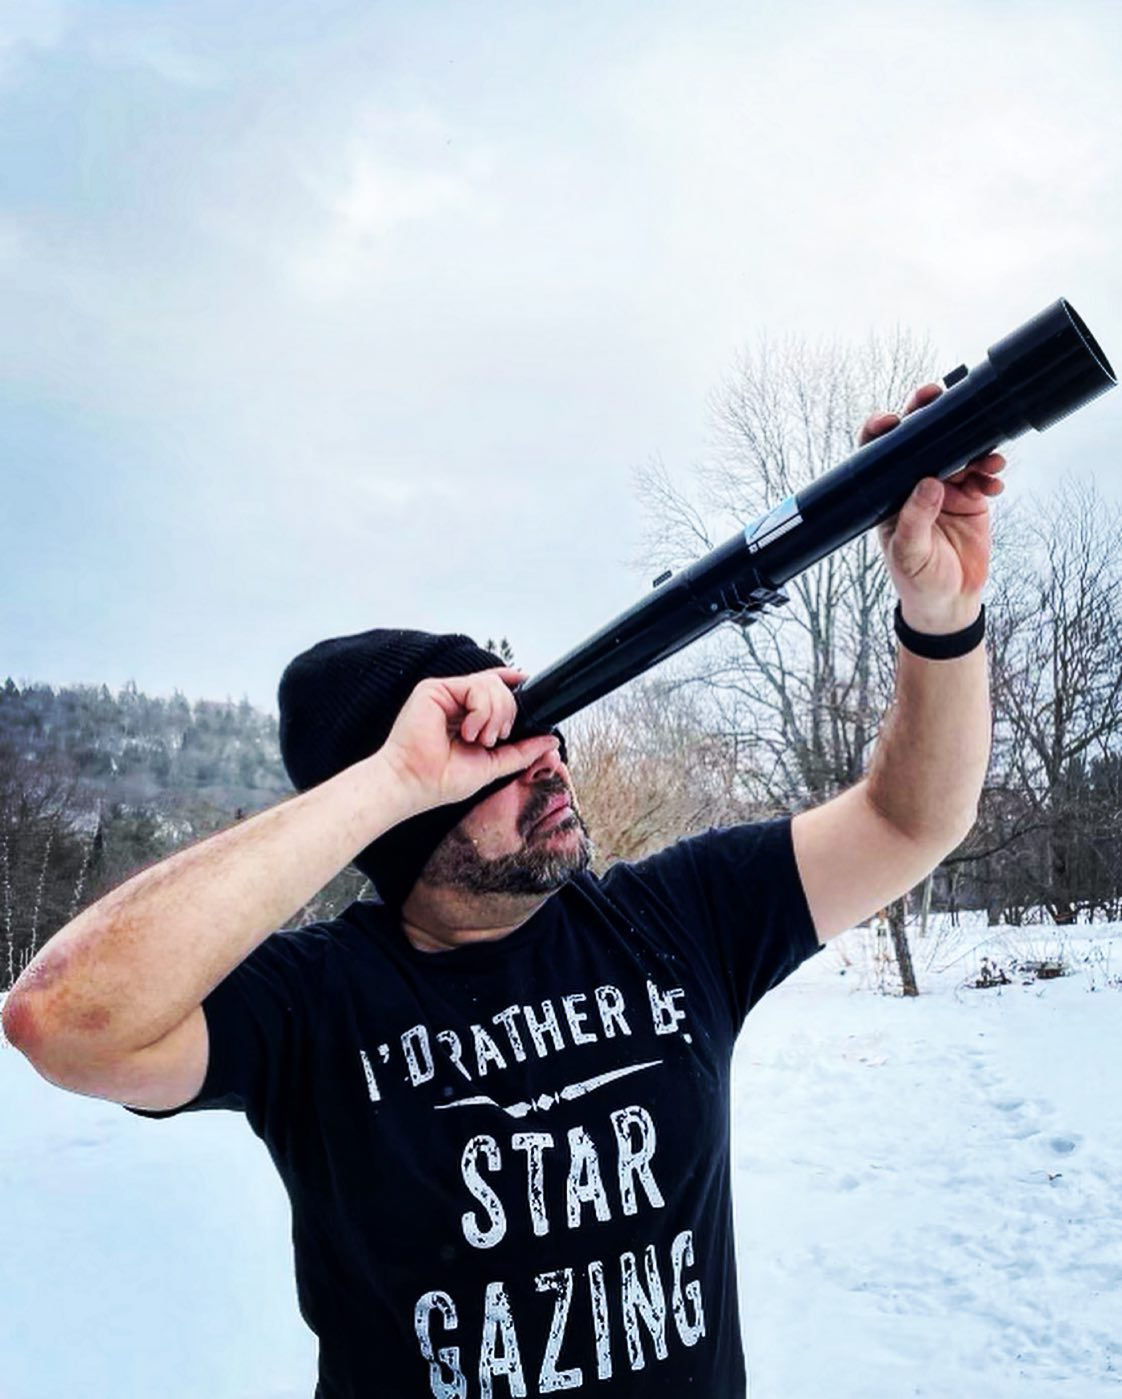 Bobby Farlice-Rubio a Science and History Educator and Storyteller looks up through a telescope